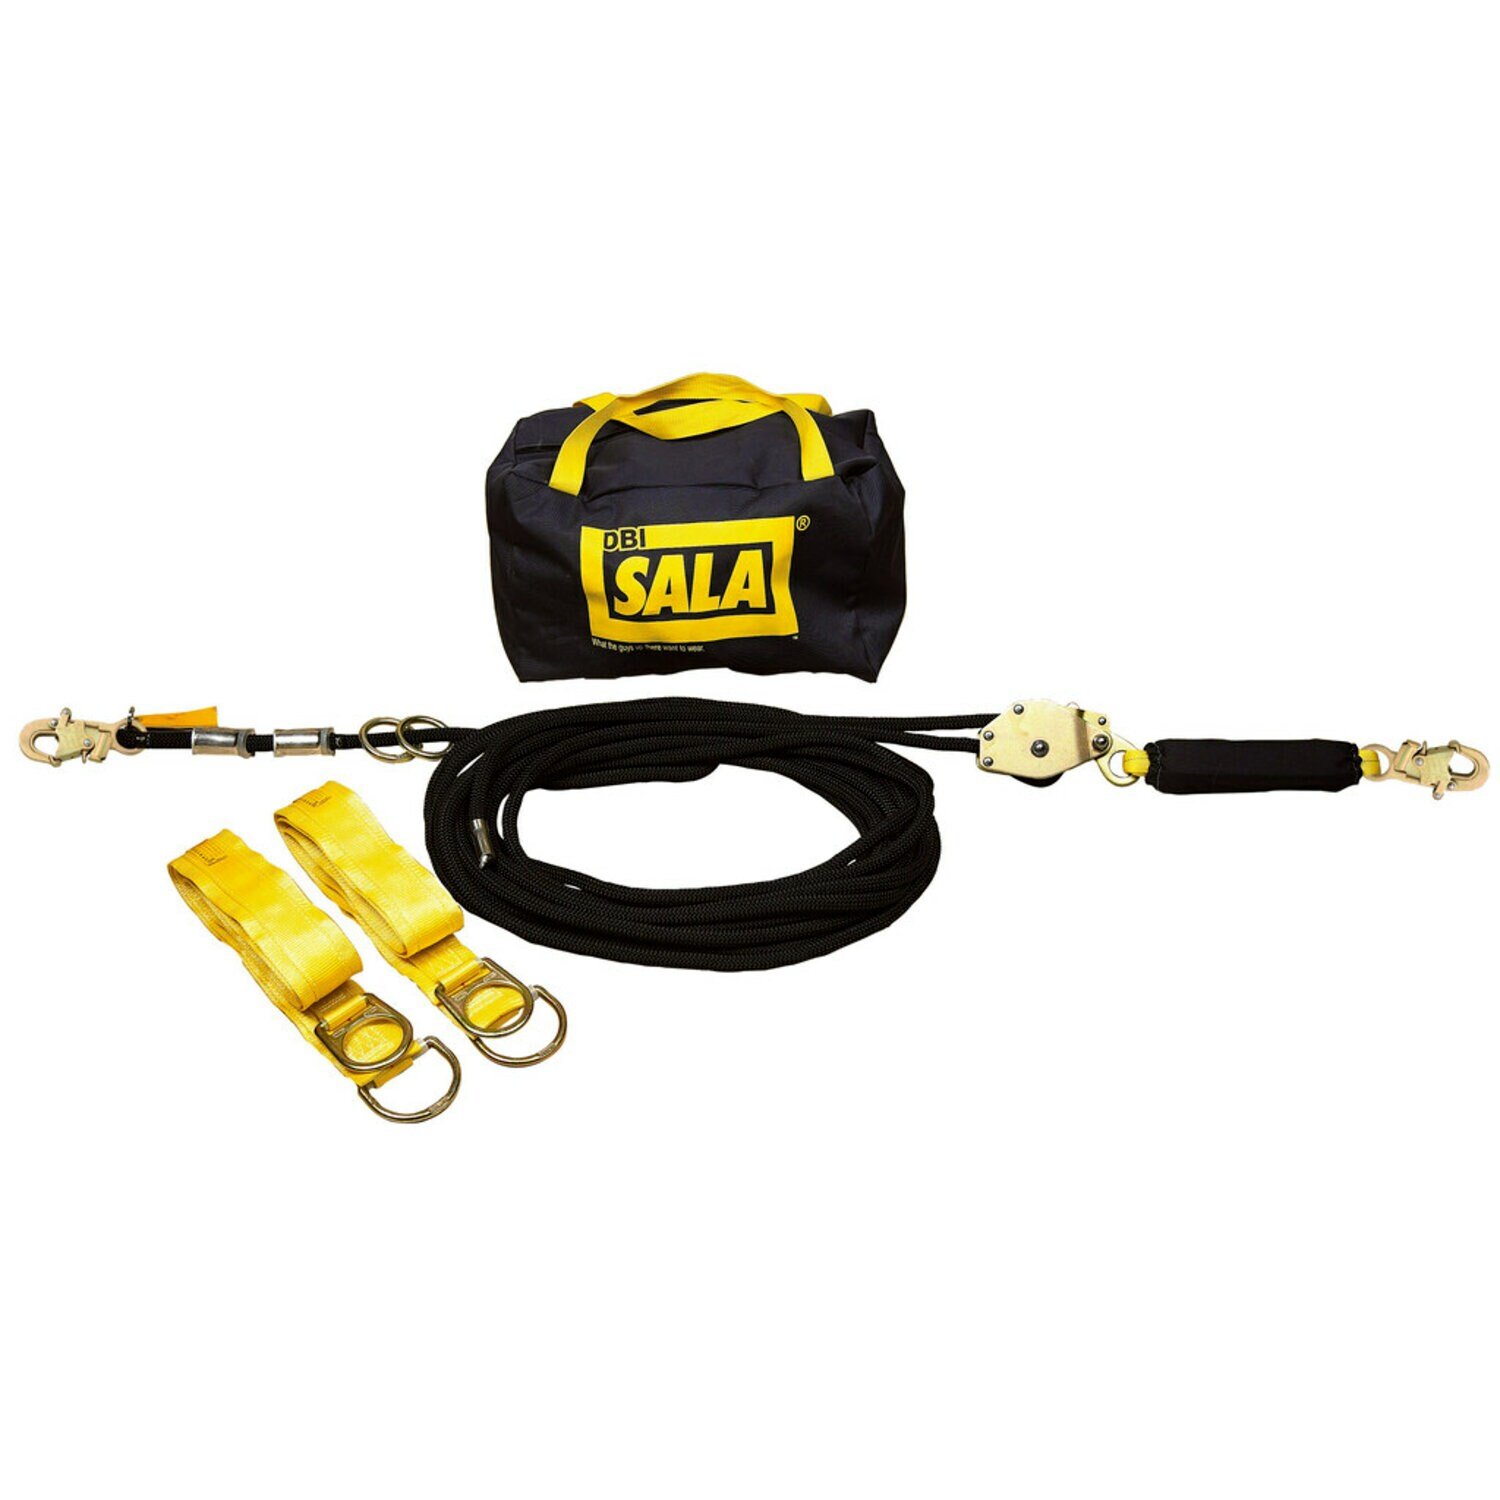 7012630015 - 3M DBI-SALA Temporary Horizontal Lifeline System with Anchors 7600709, 11/16 in Nylon Kernmantle Rope, 100 ft